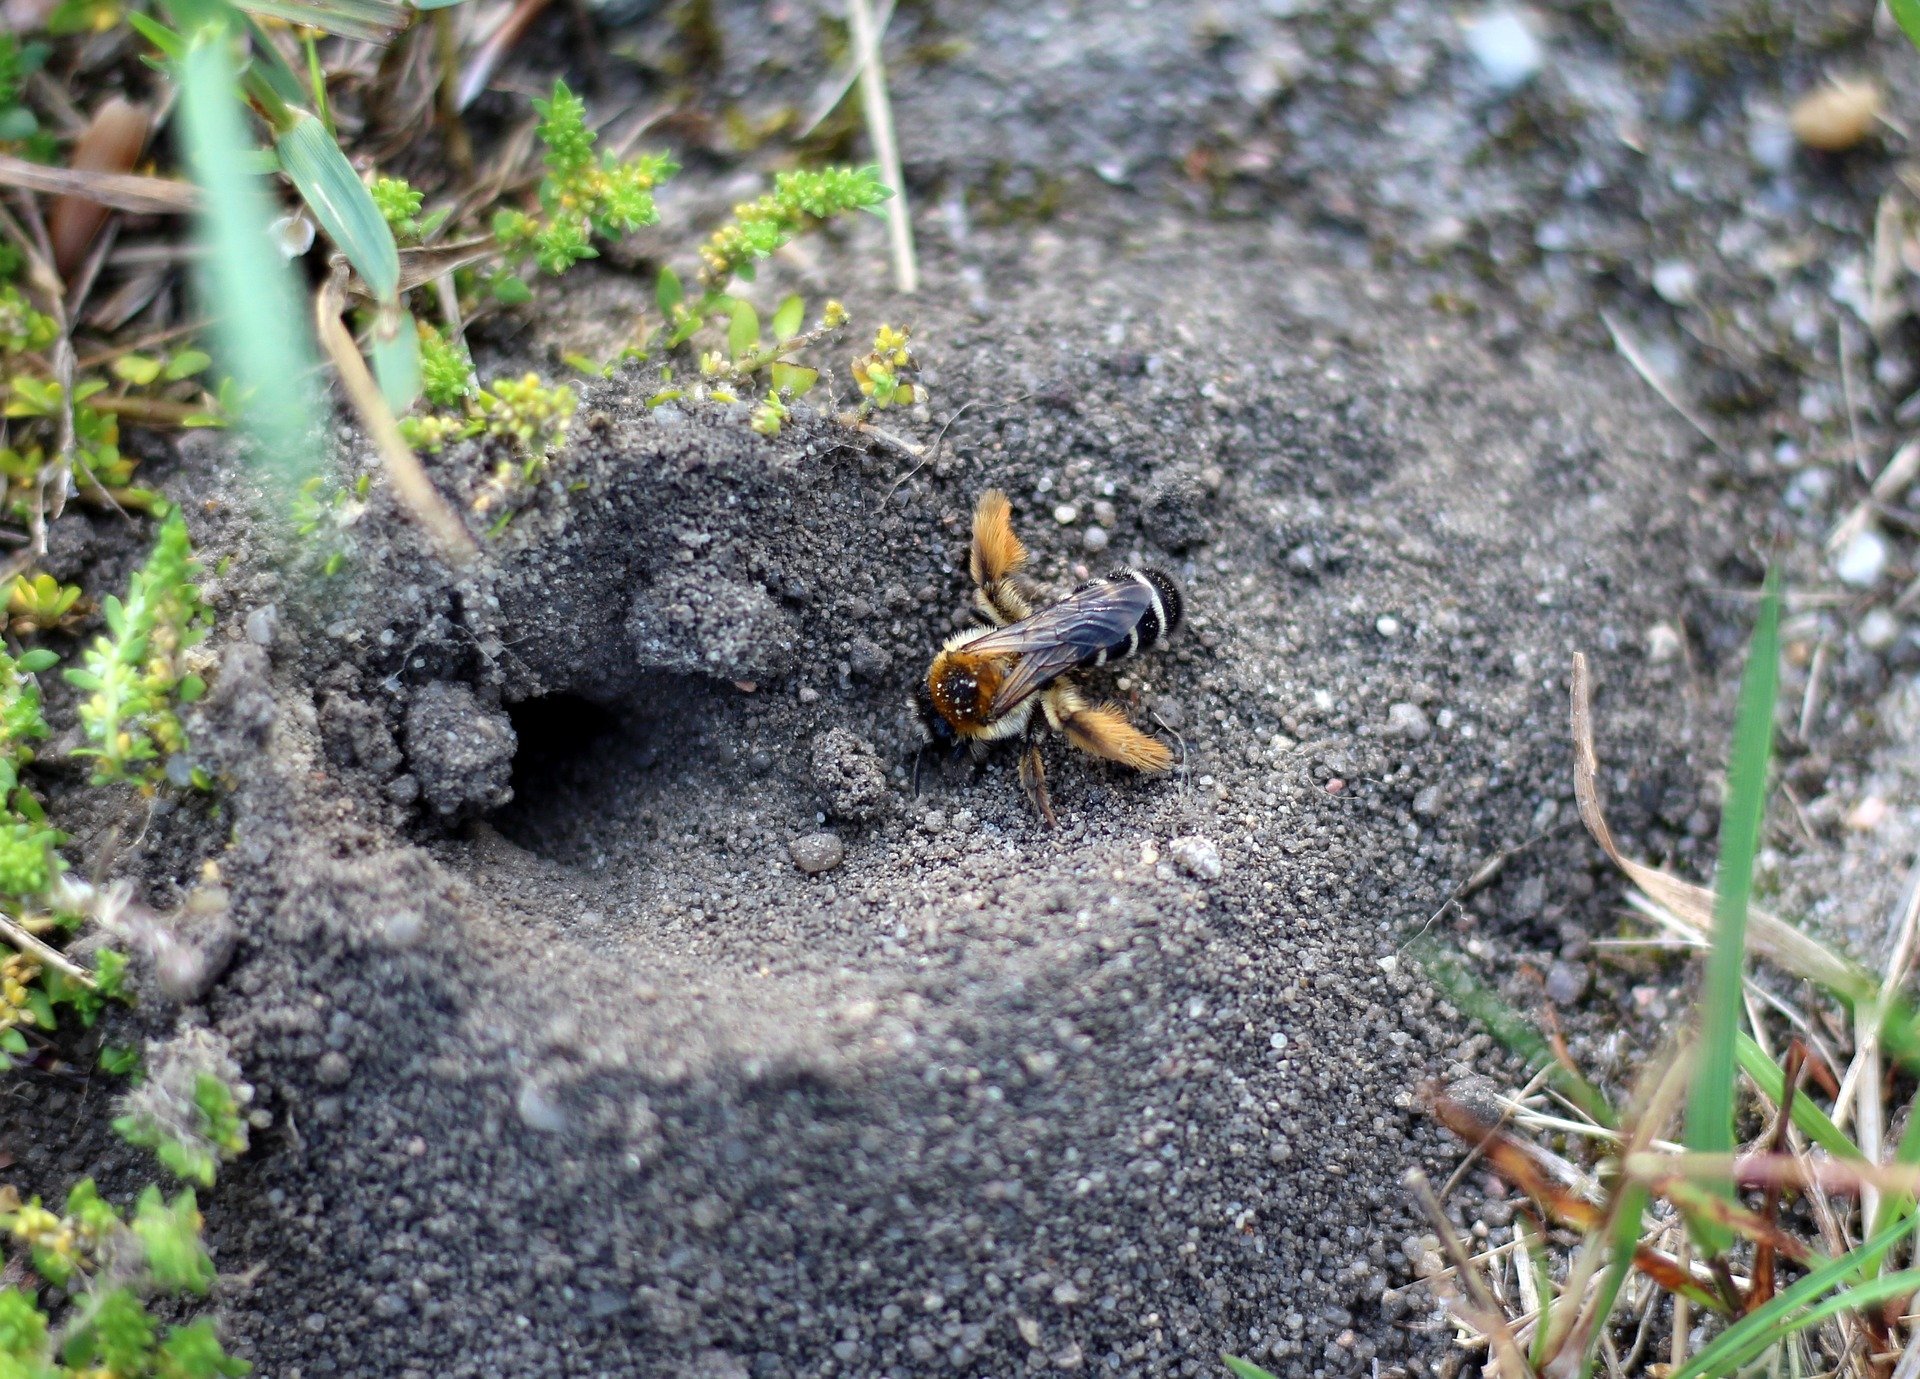 How to Create Nesting Habitat for Native Pollinators | Native bees and other pollinators need homes … what can we do to help them?